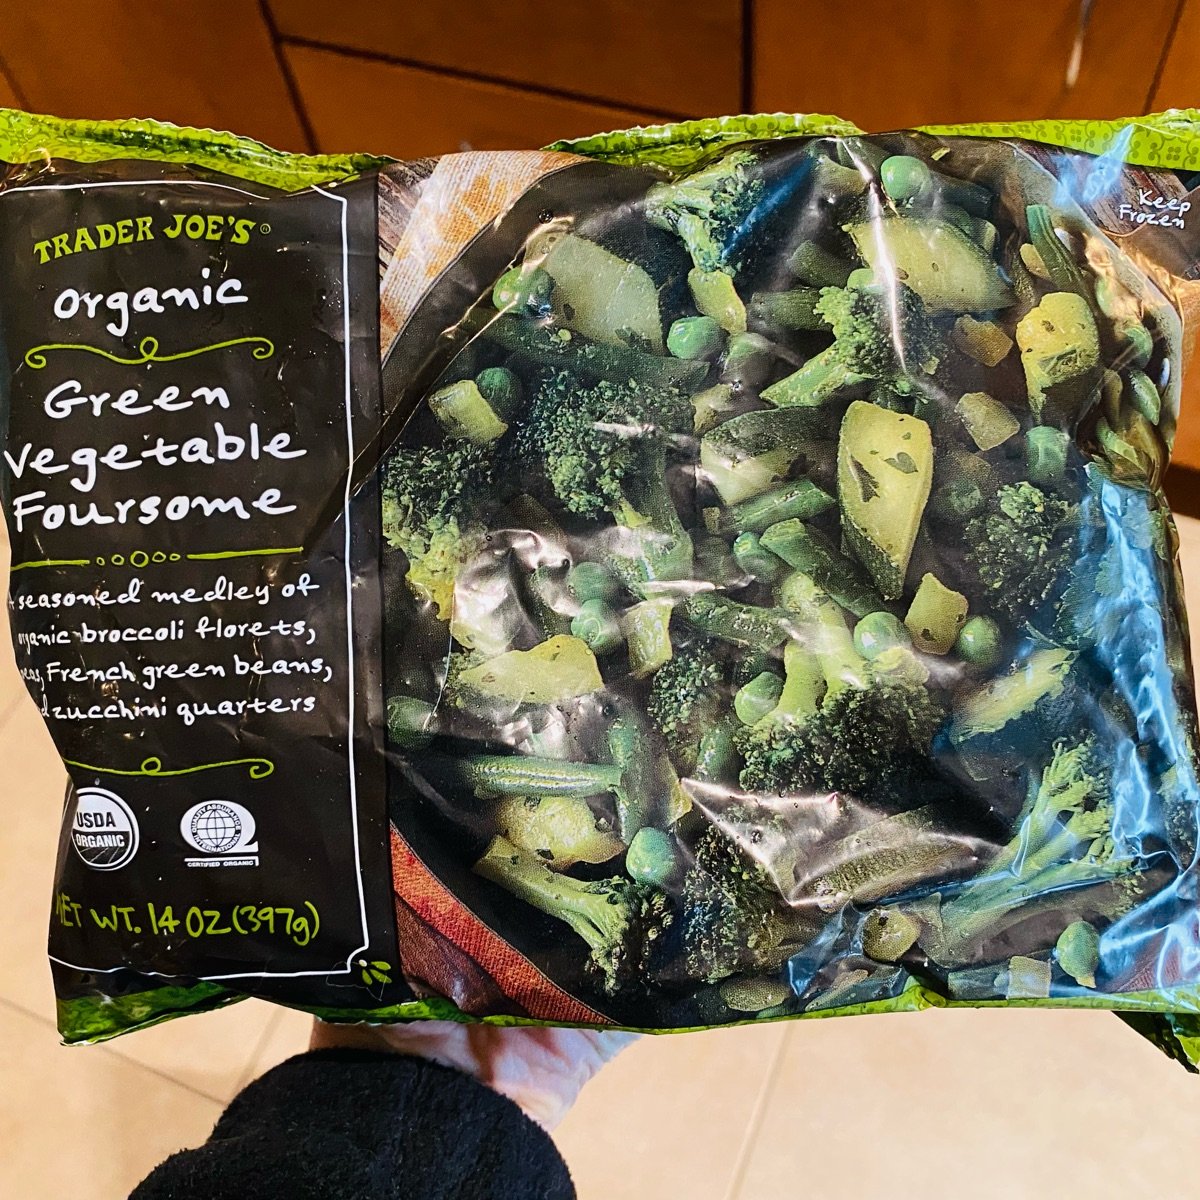 Trader Joe's Organic Whole Green Beans Review – Freezer Meal Frenzy